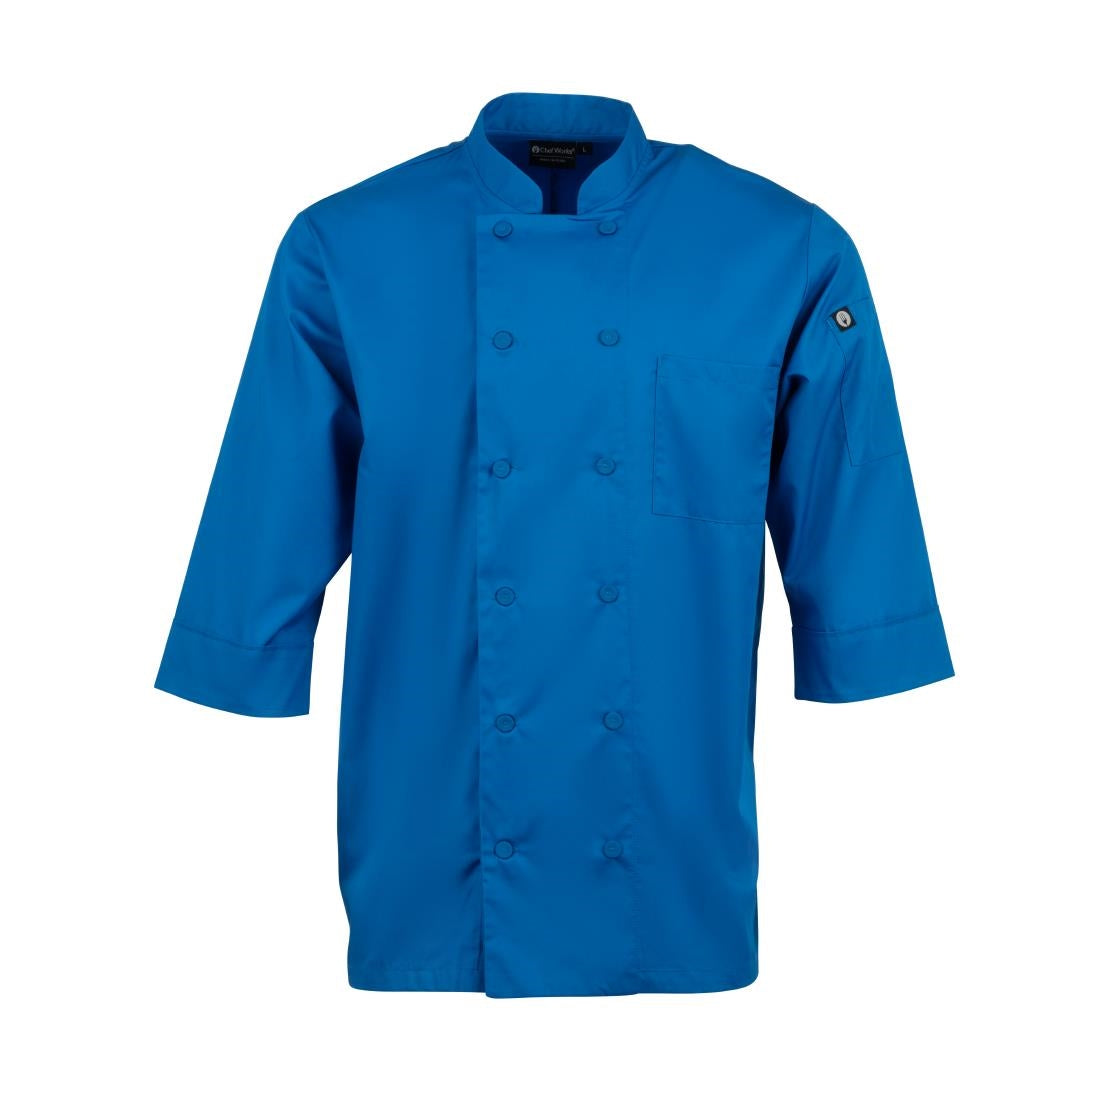 B178-M Chef Works Unisex Chefs Jacket Blue M JD Catering Equipment Solutions Ltd